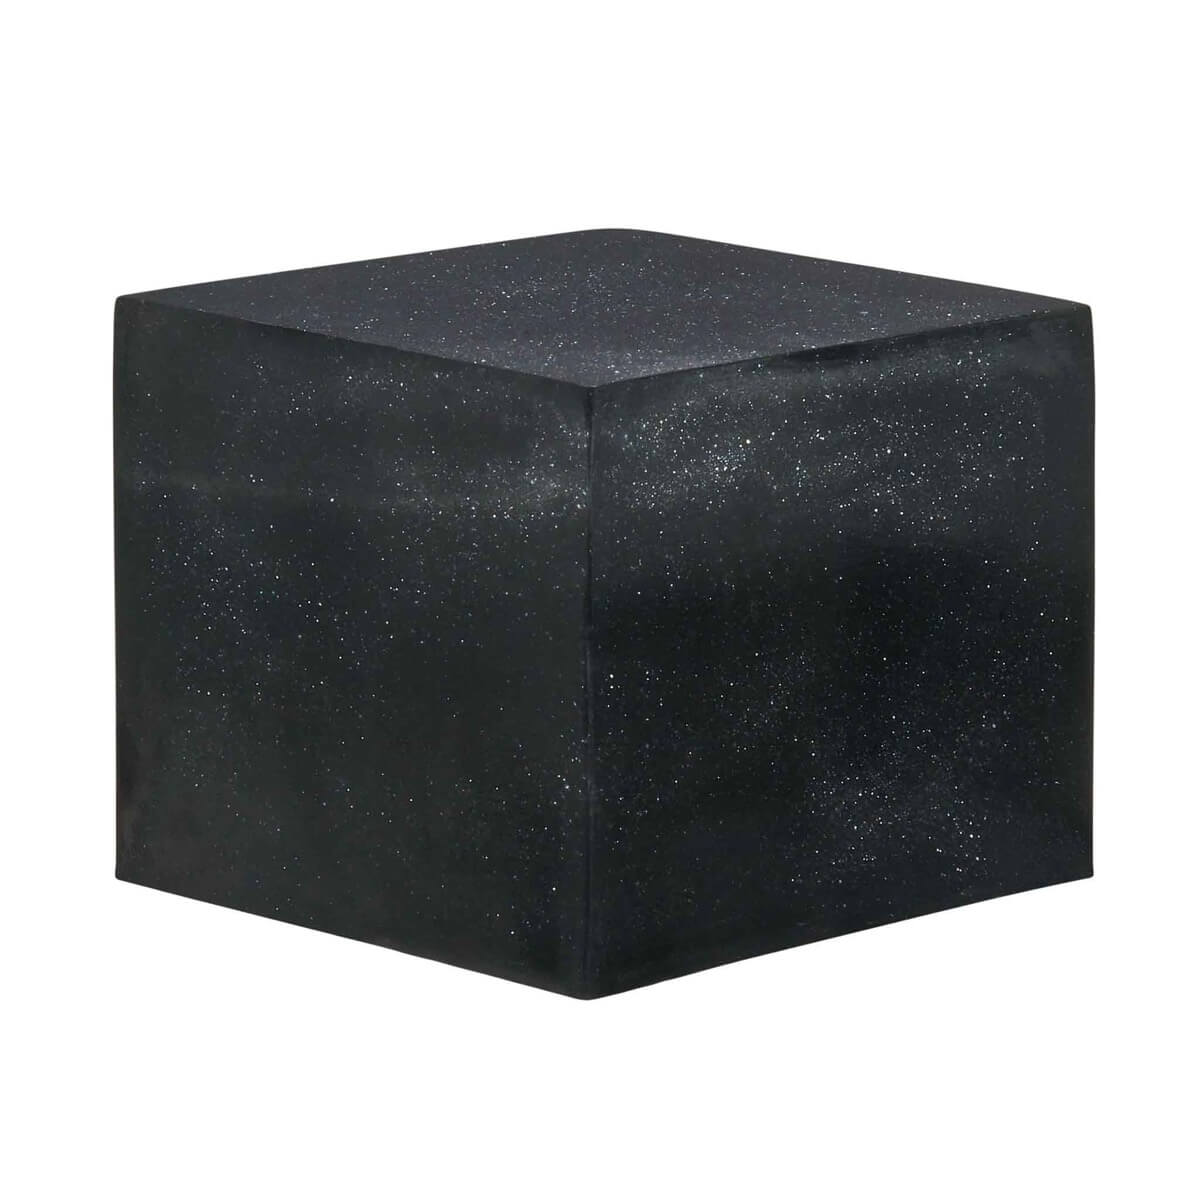 A resin cube made with the Dark Matter Mica Powder Pigment by Pigmently.